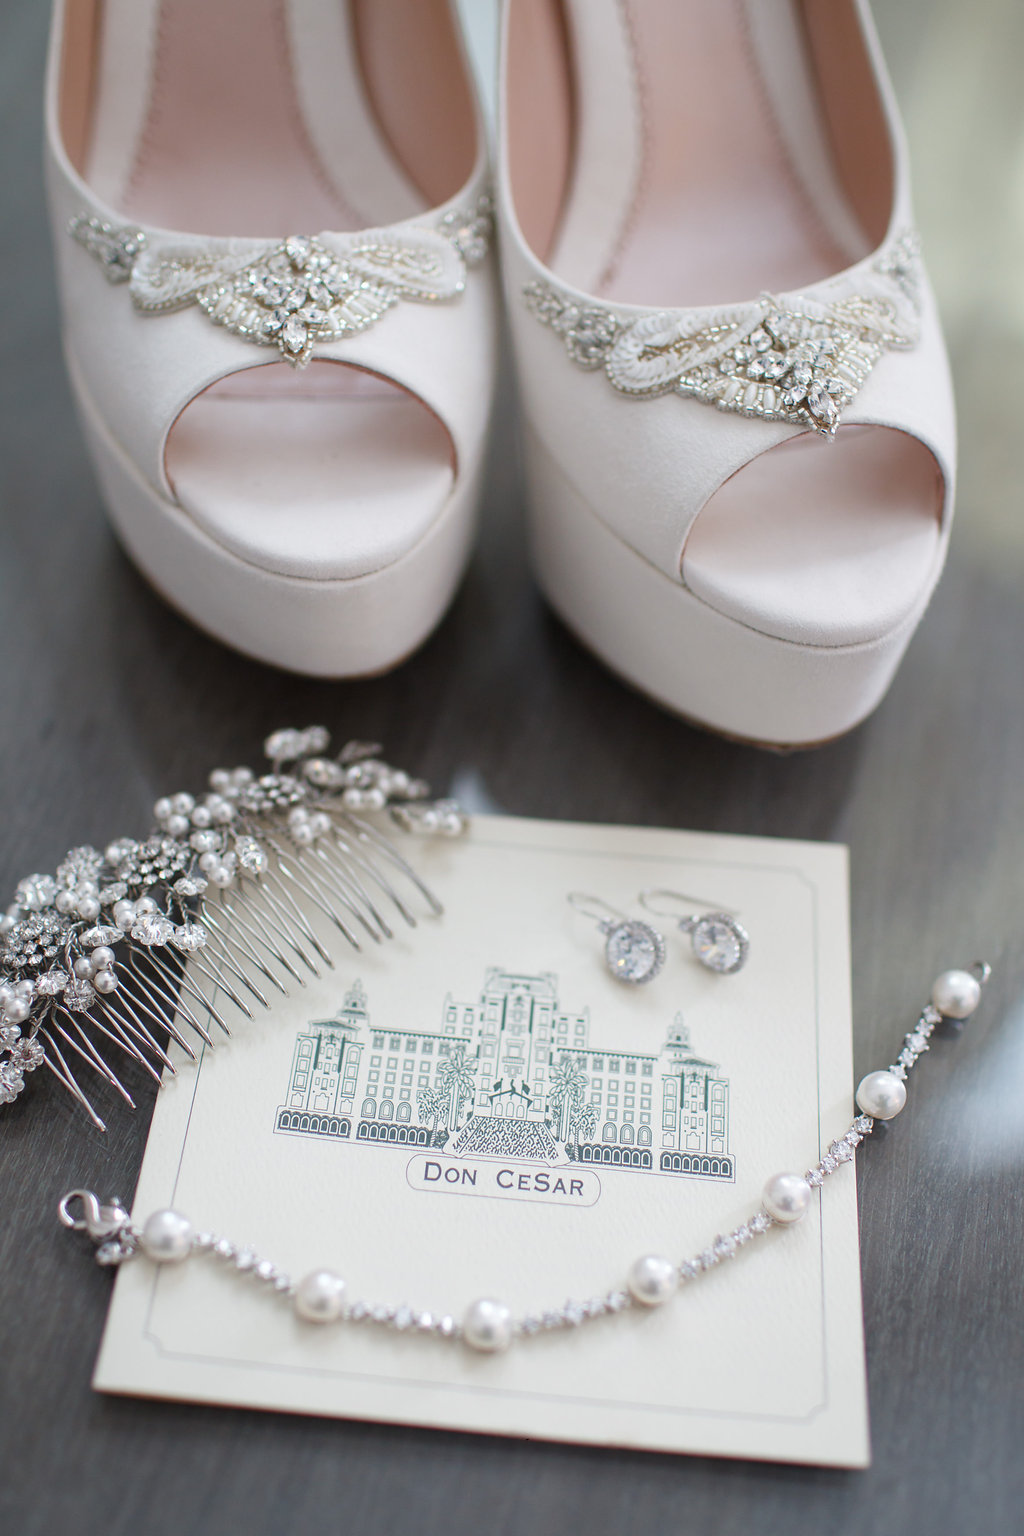 Getting Ready Details: Wedding Shoes and Jewlery